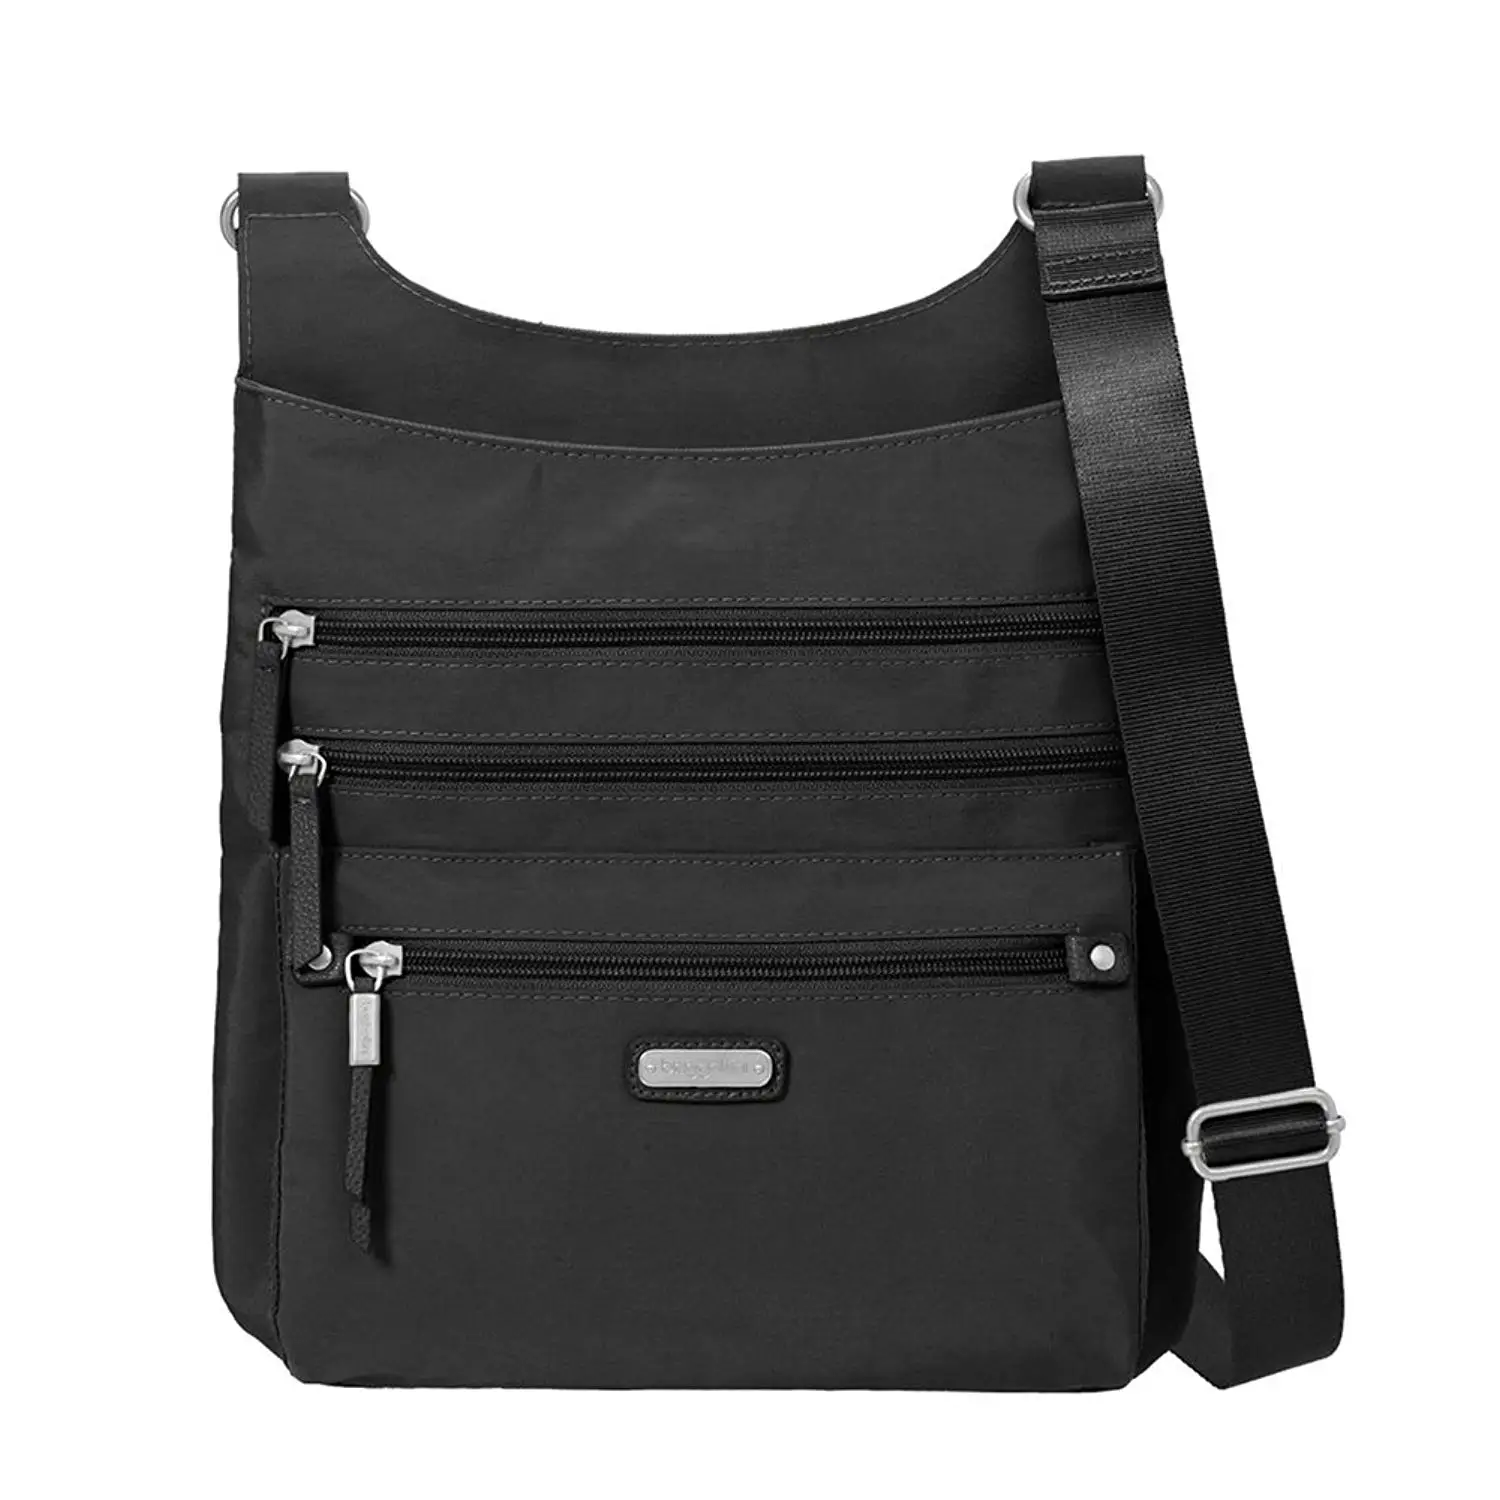 Cheap H H Bagg, find H H Bagg deals on line at Alibaba.com